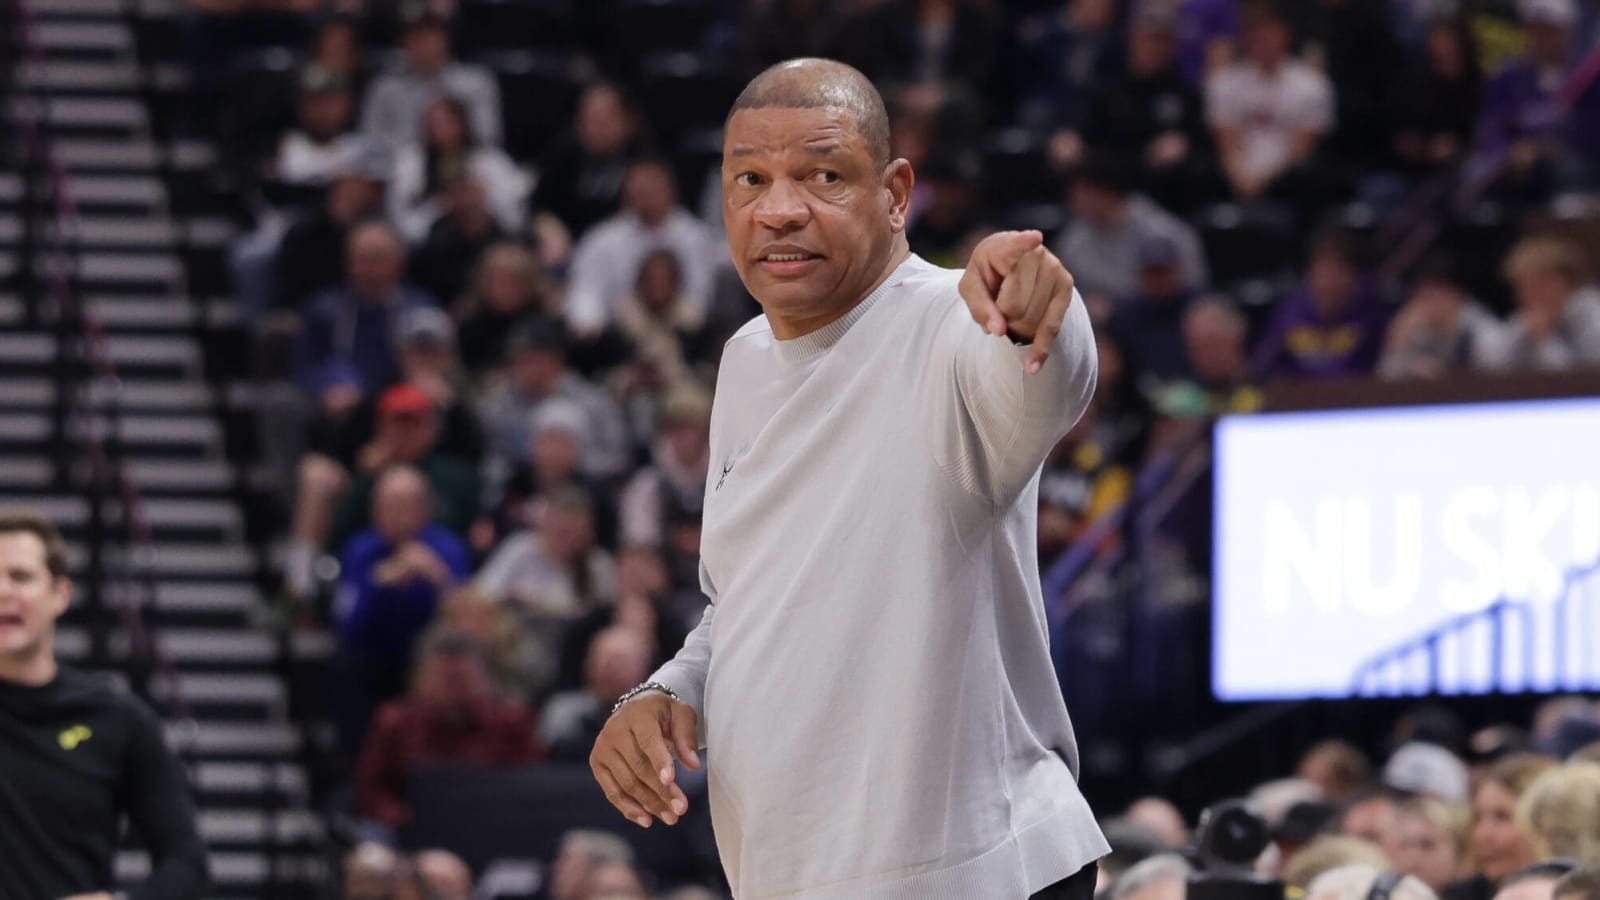 Doc Rivers wanted to do one thing differently when taking Bucks job